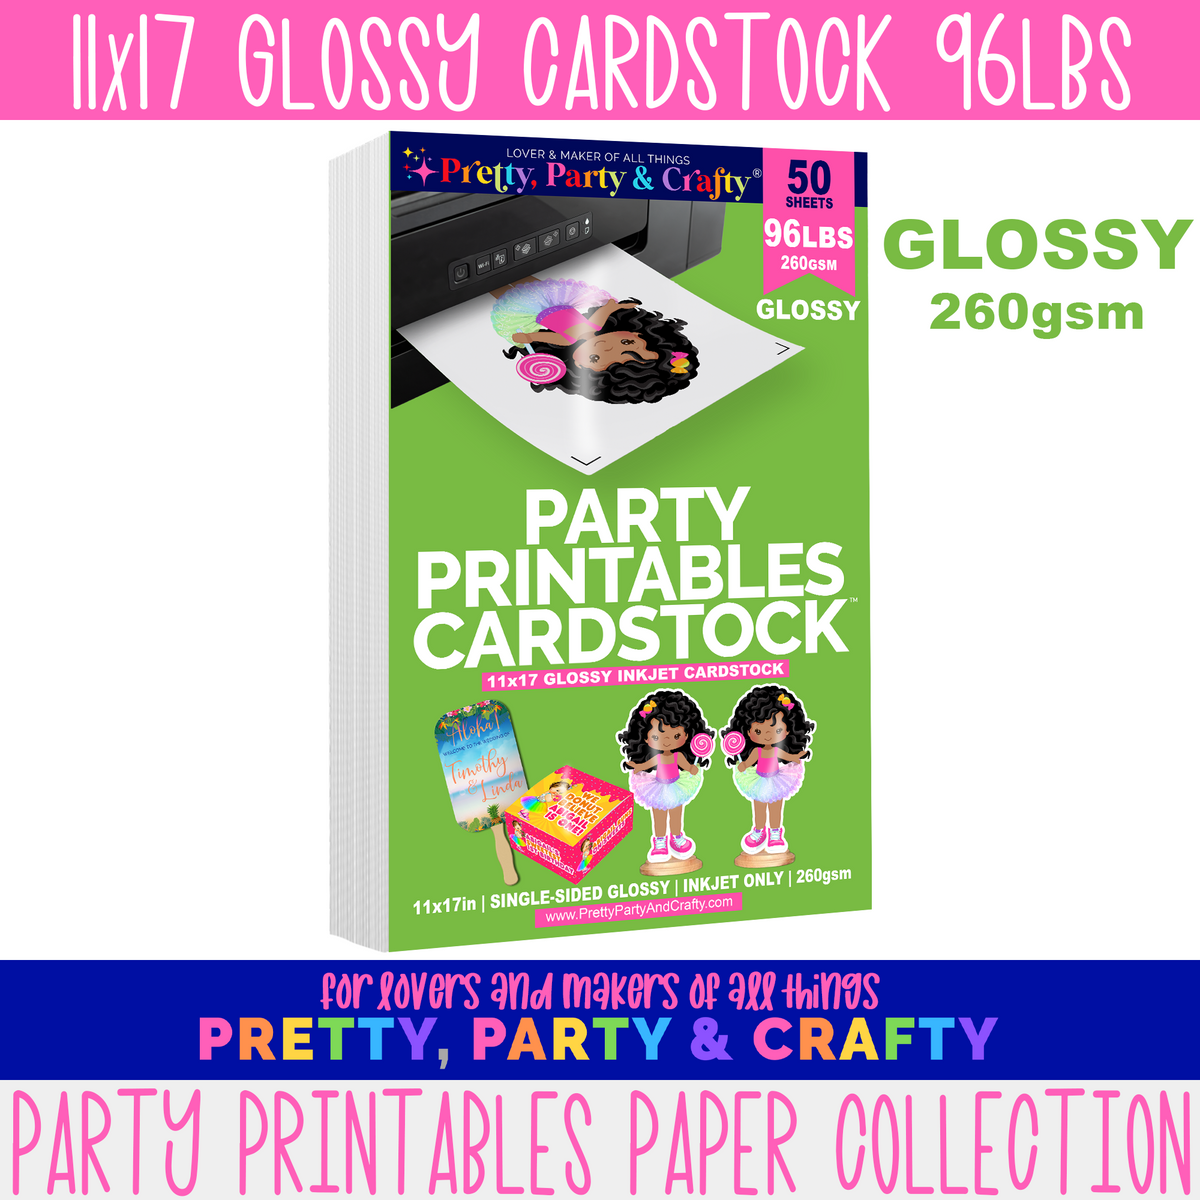 Party Printable Paper Glossy Cardstock 96lbs 11x17